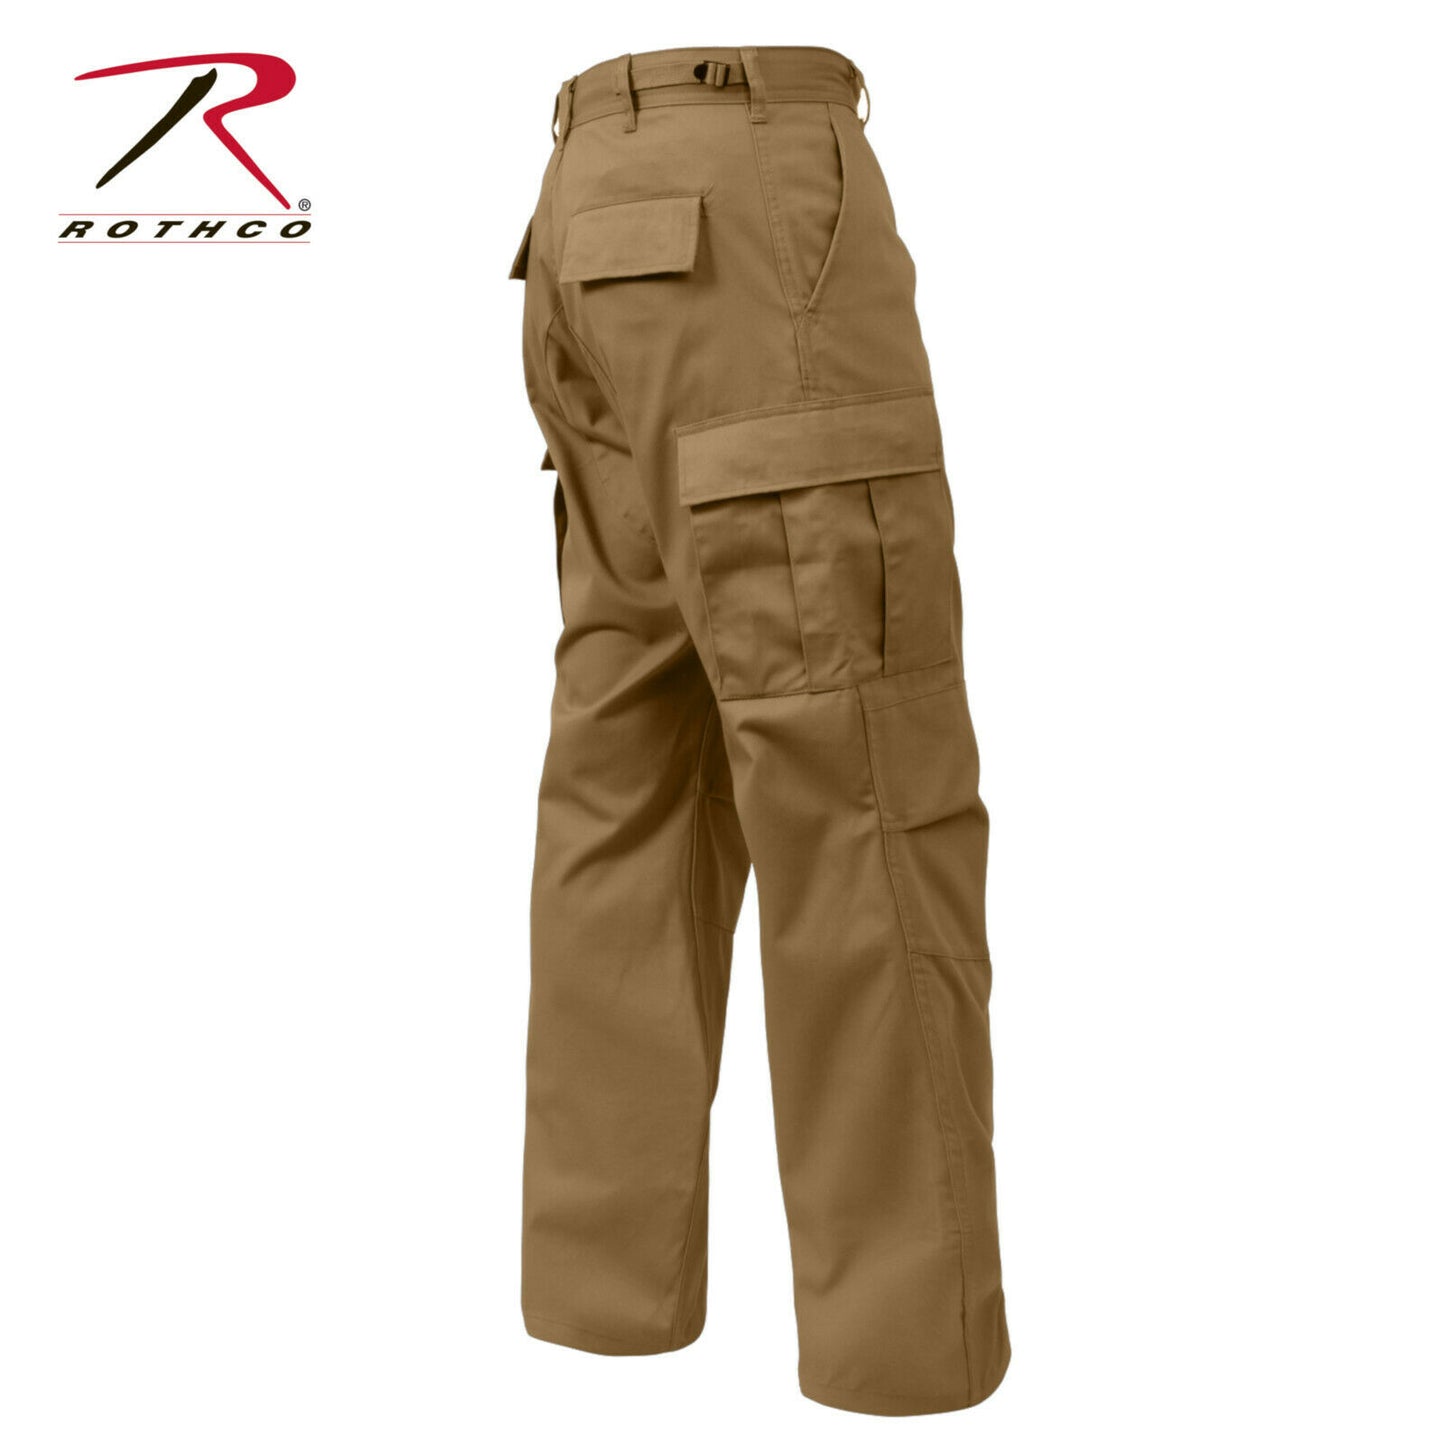 Rothco Relaxed Fit Zipper Fly BDU Pants - Coyote Brown Cargo Fatigues